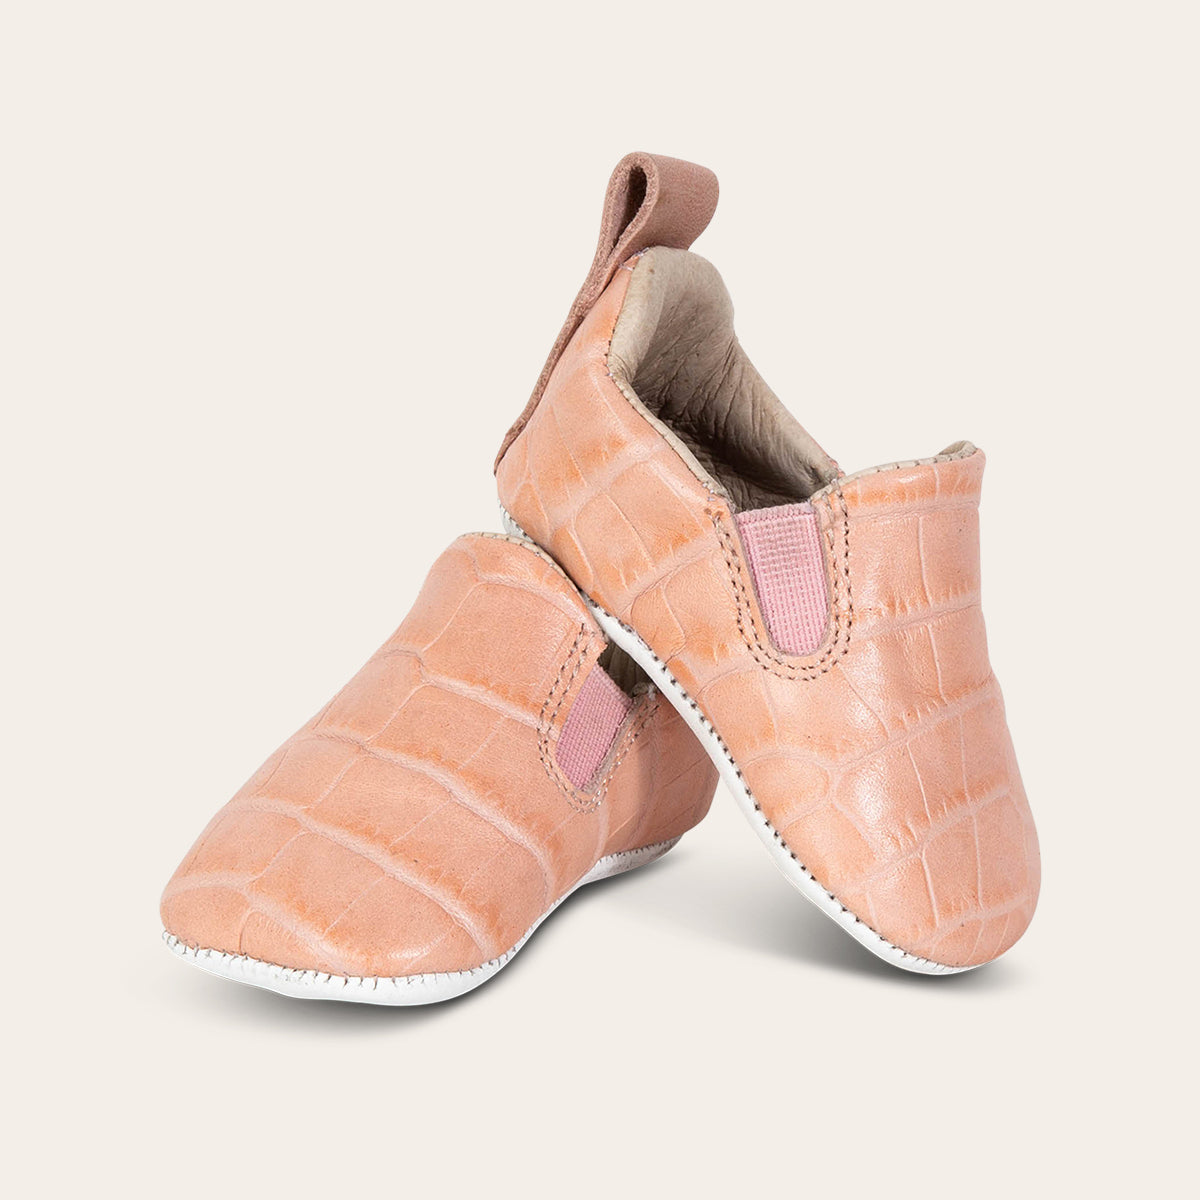 front view showing heel pull tab and side elastic panel on FREEBIRD infant baby kicks pink croco leather shoe